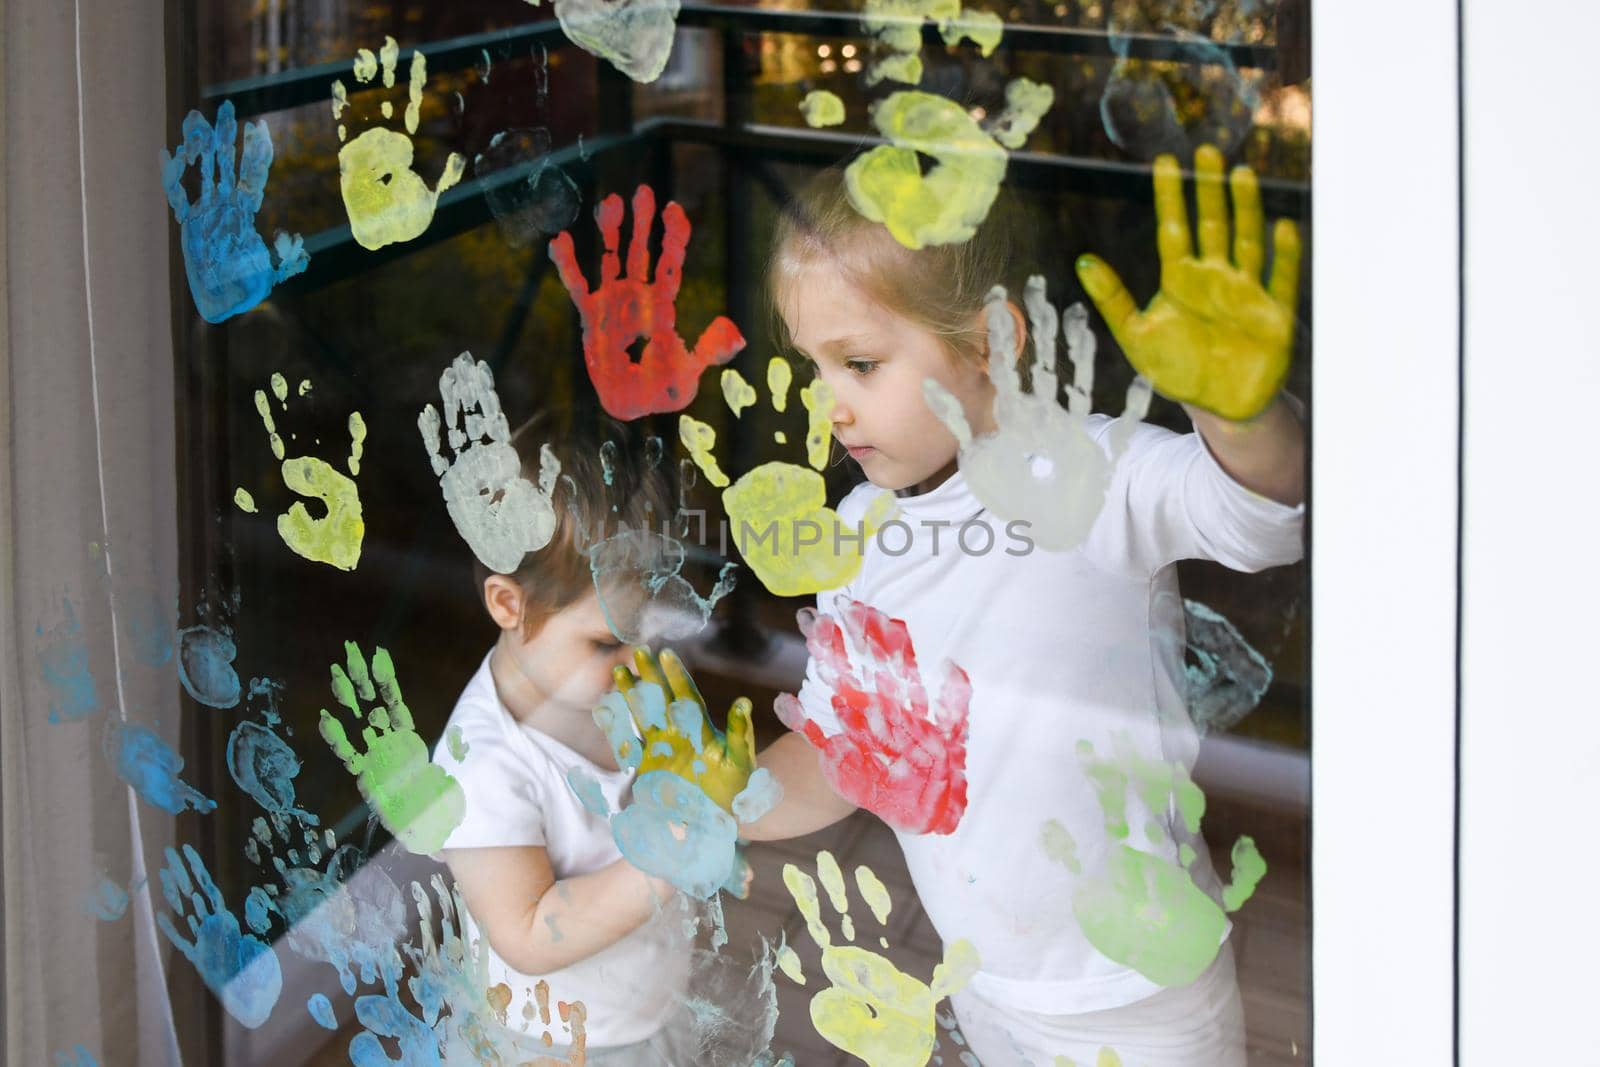 The kids paint with palms on the window. Quarantine Stay at home